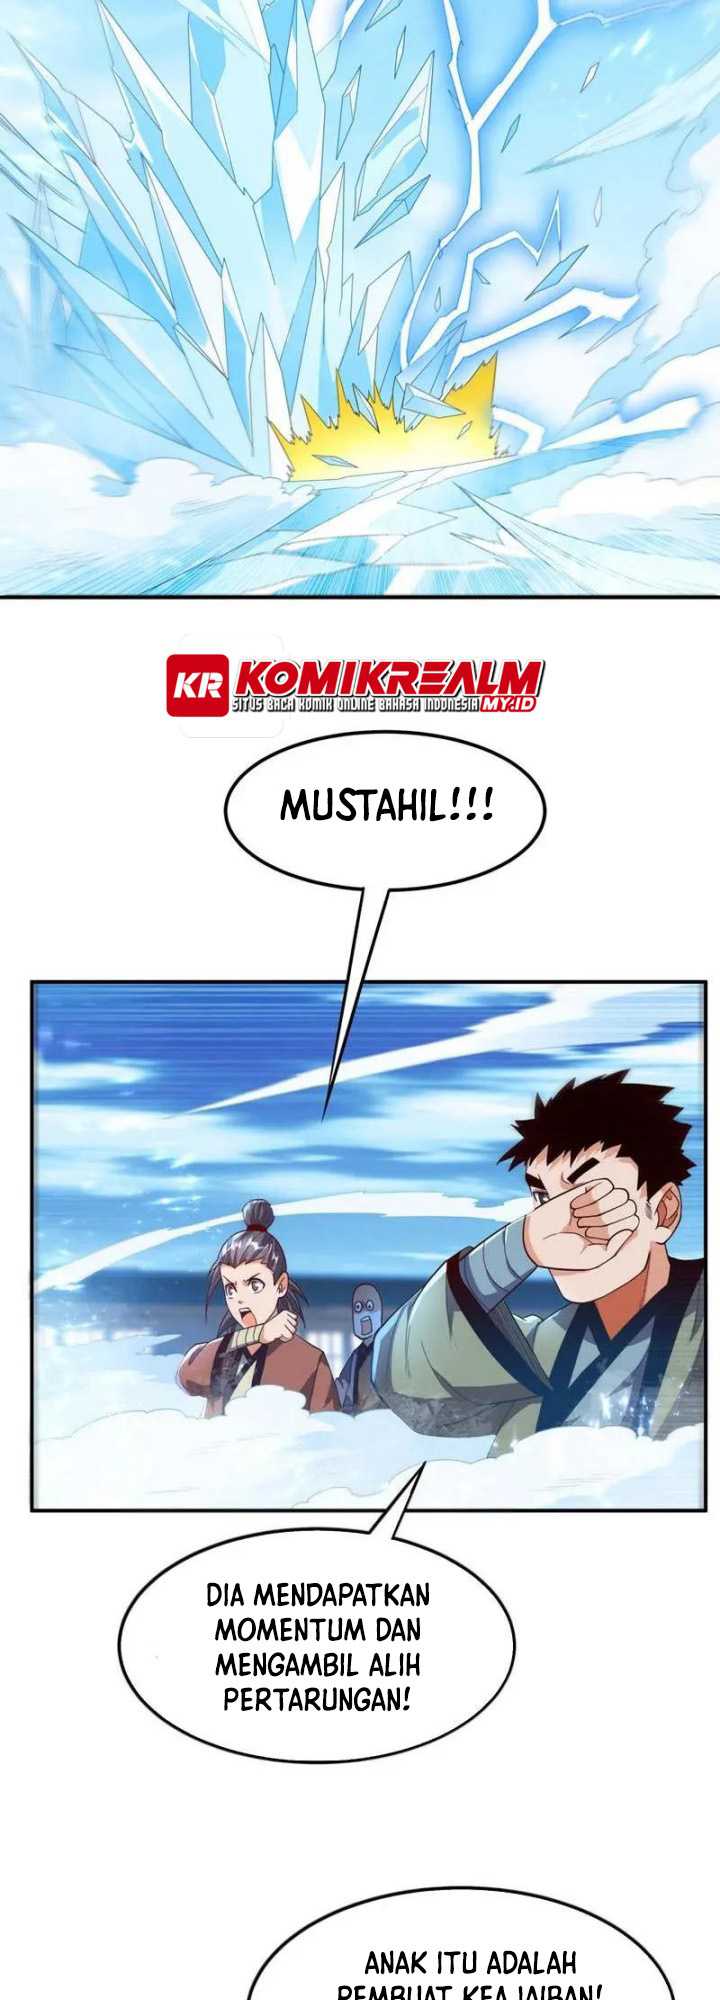 Martial Inverse Chapter 95